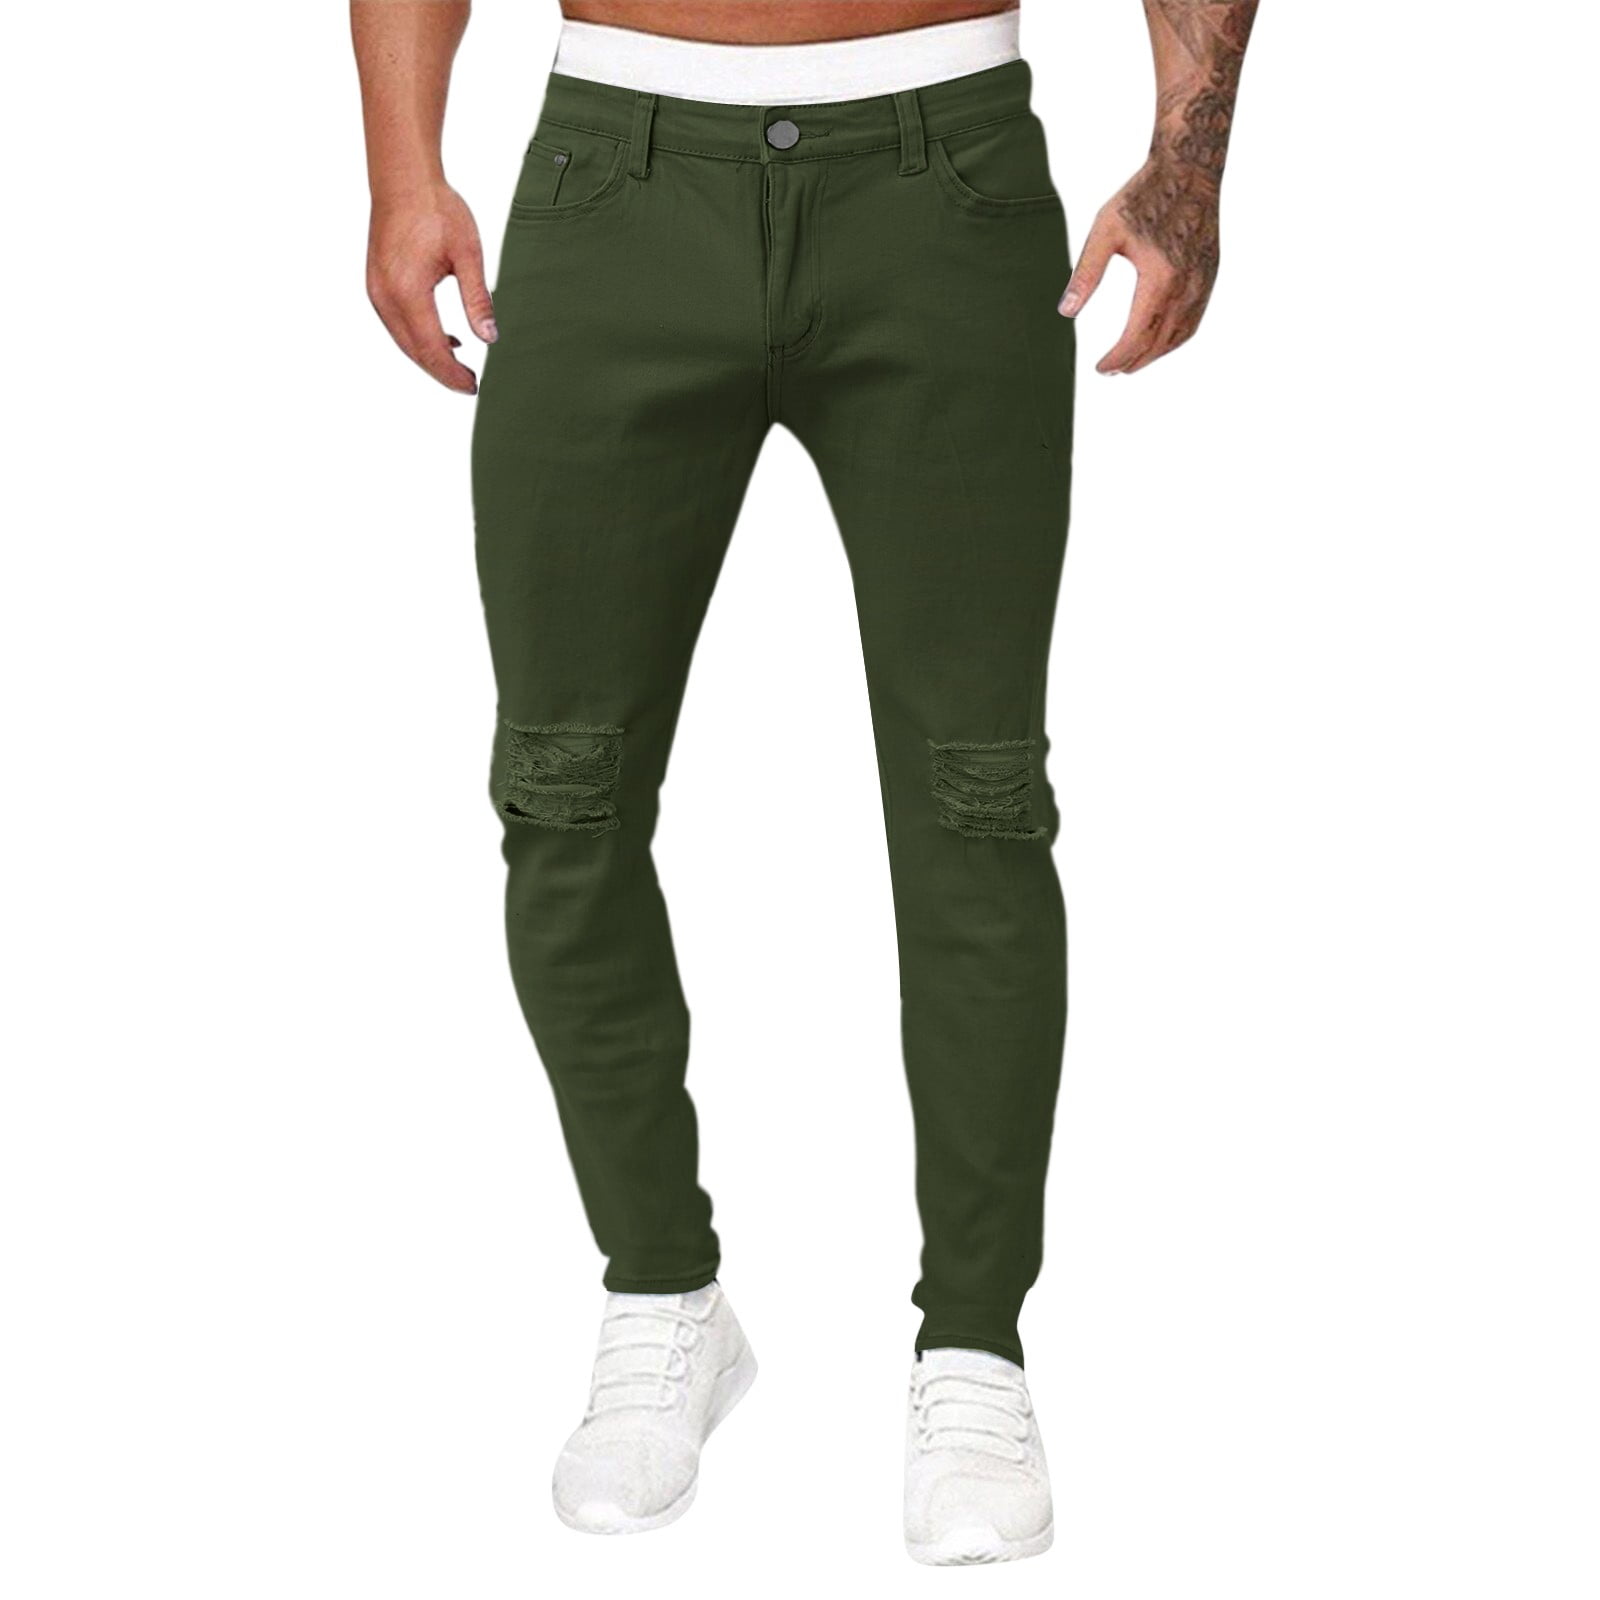 Distressed jeans - Col. Green